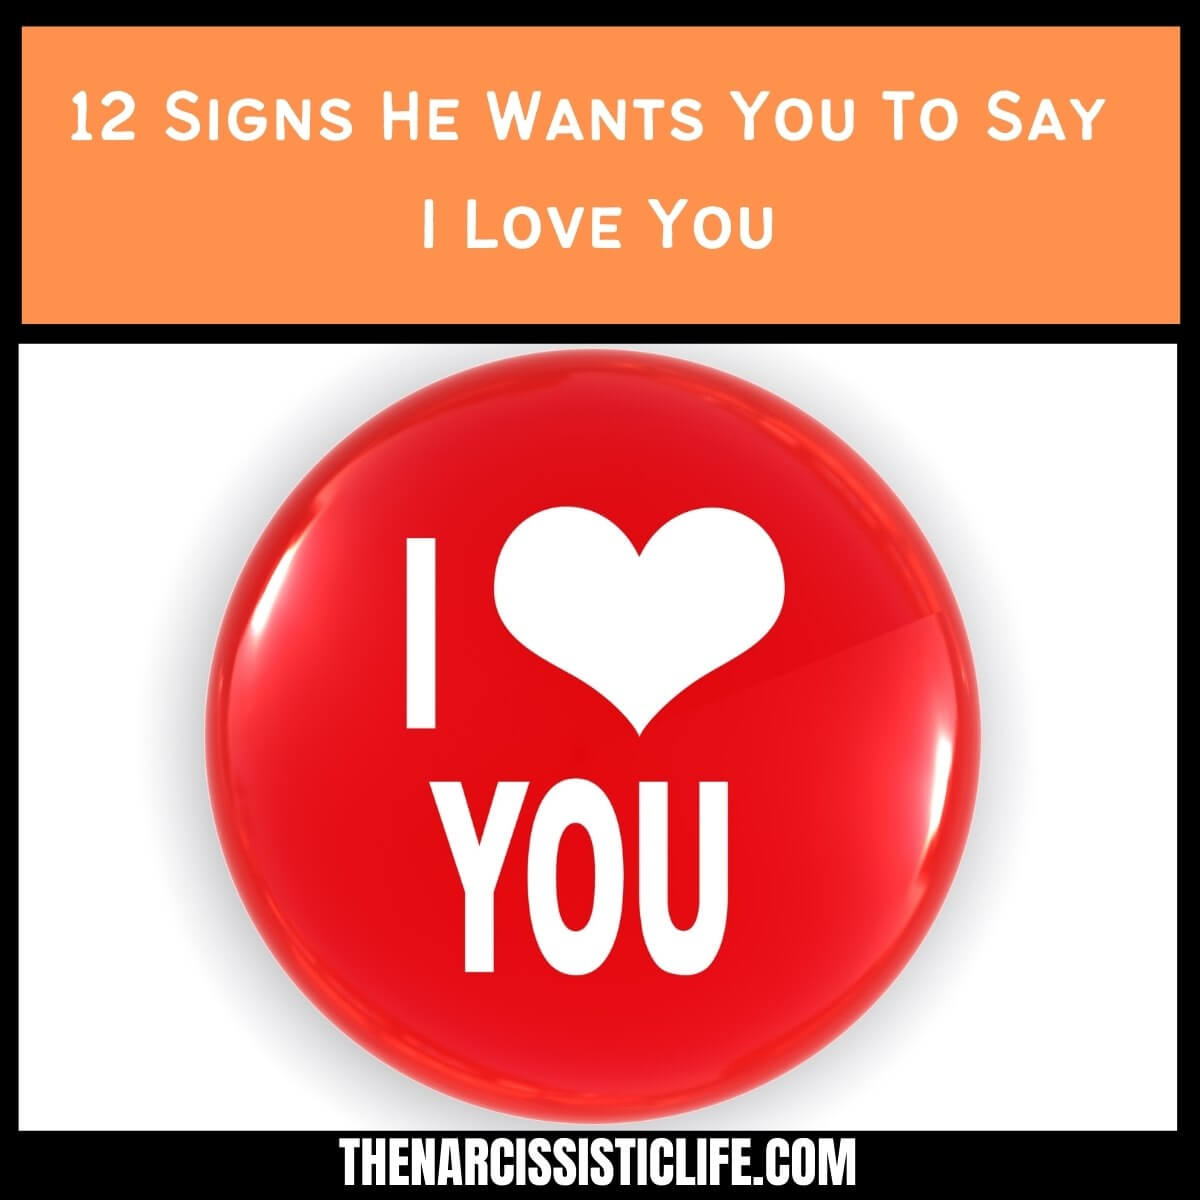 12 Signs He Wants You To Say I Love You